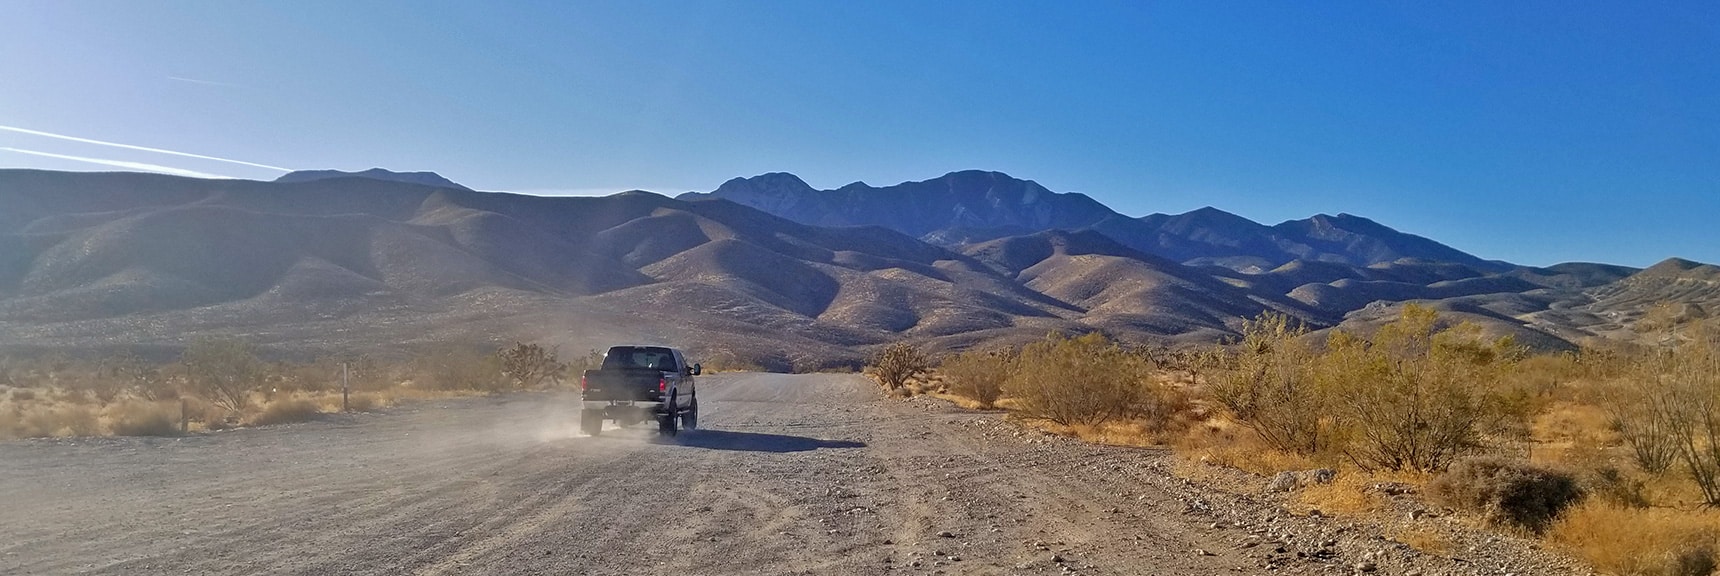 Starting Out on Lower Harris Springs Road from Kyle Canyon Rd | Harris Springs Rd, Harris Mountain Rd | Spring Mountains Wilderness, Nevada